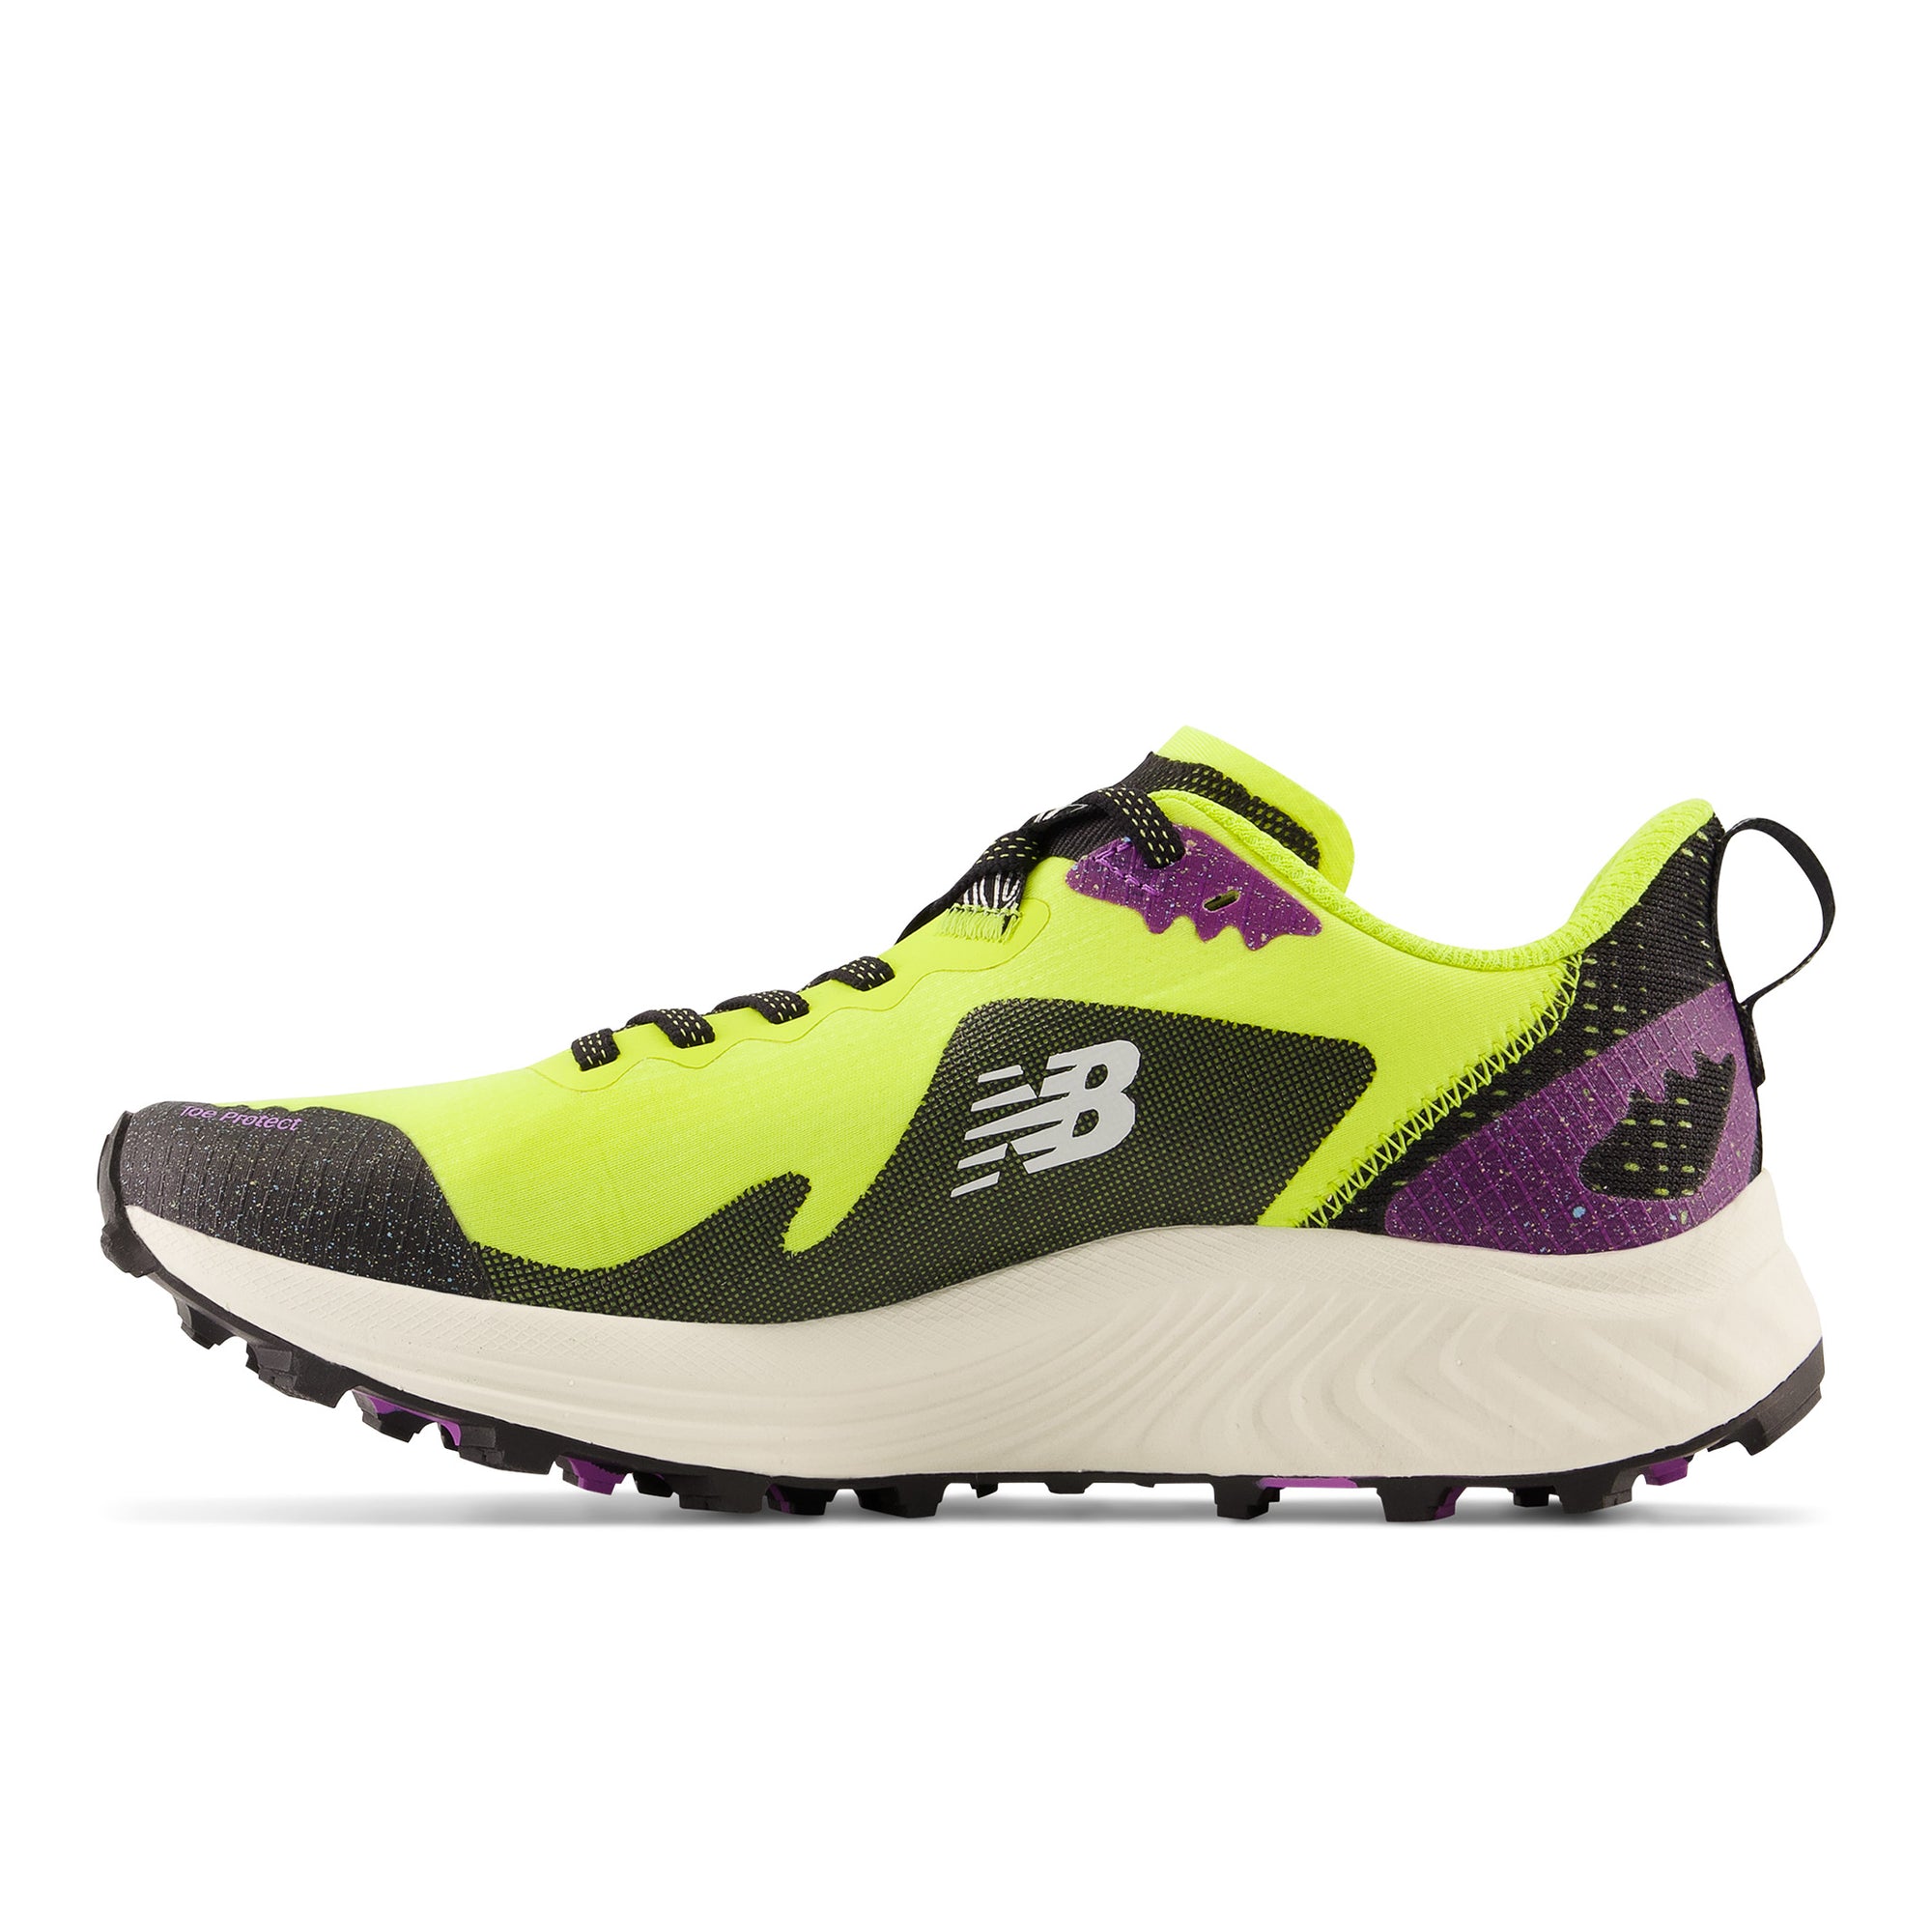 NEW BALANCE FUELCELL SUMMIT UNKNOWN V3 - FEMME